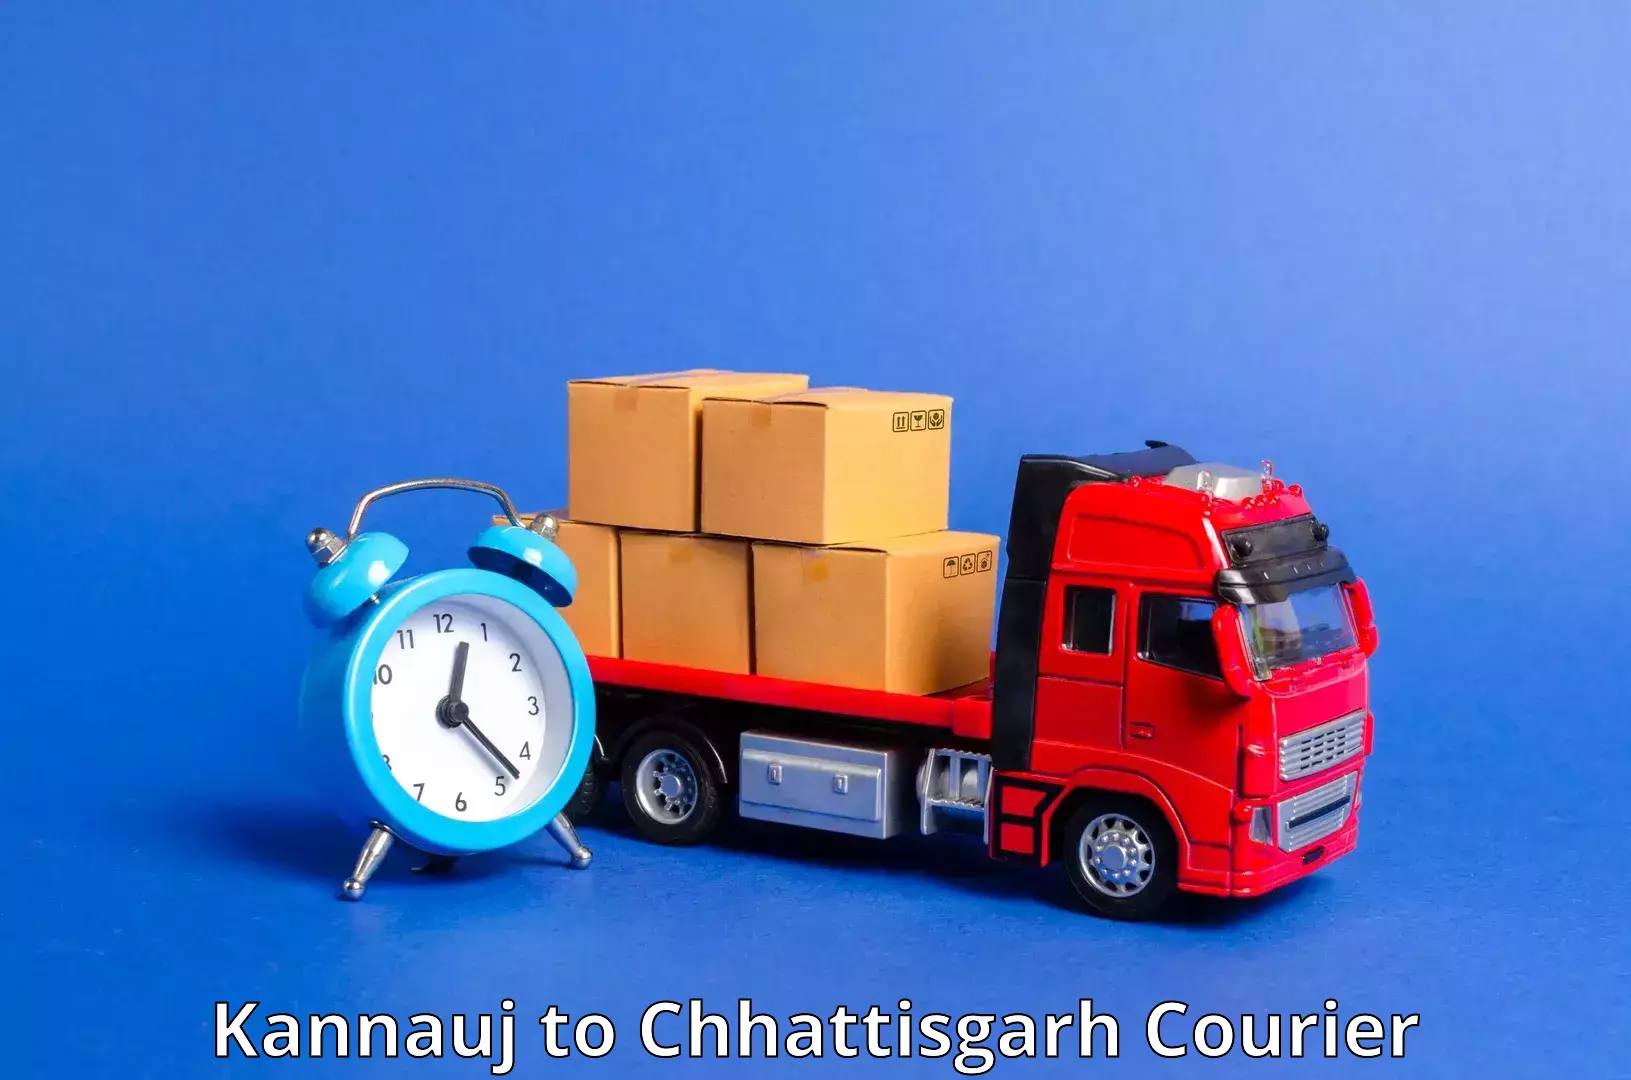 Round-the-clock parcel delivery Kannauj to Dhamtari